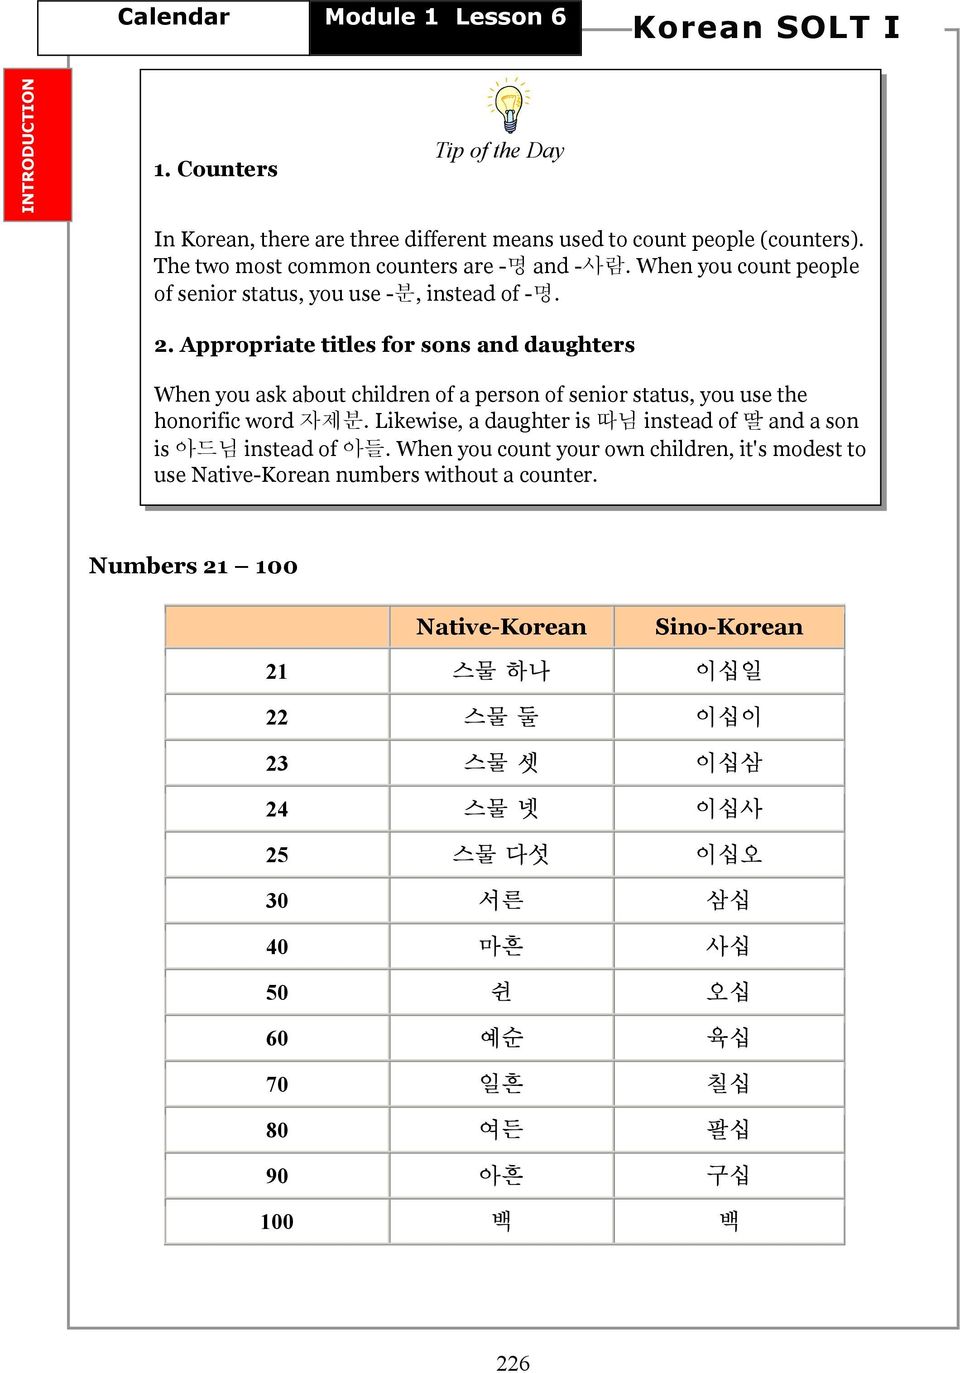 Appropriate titles for sons and daughters When you ask about children of a person of senior status, you use the honorific word 자제분.